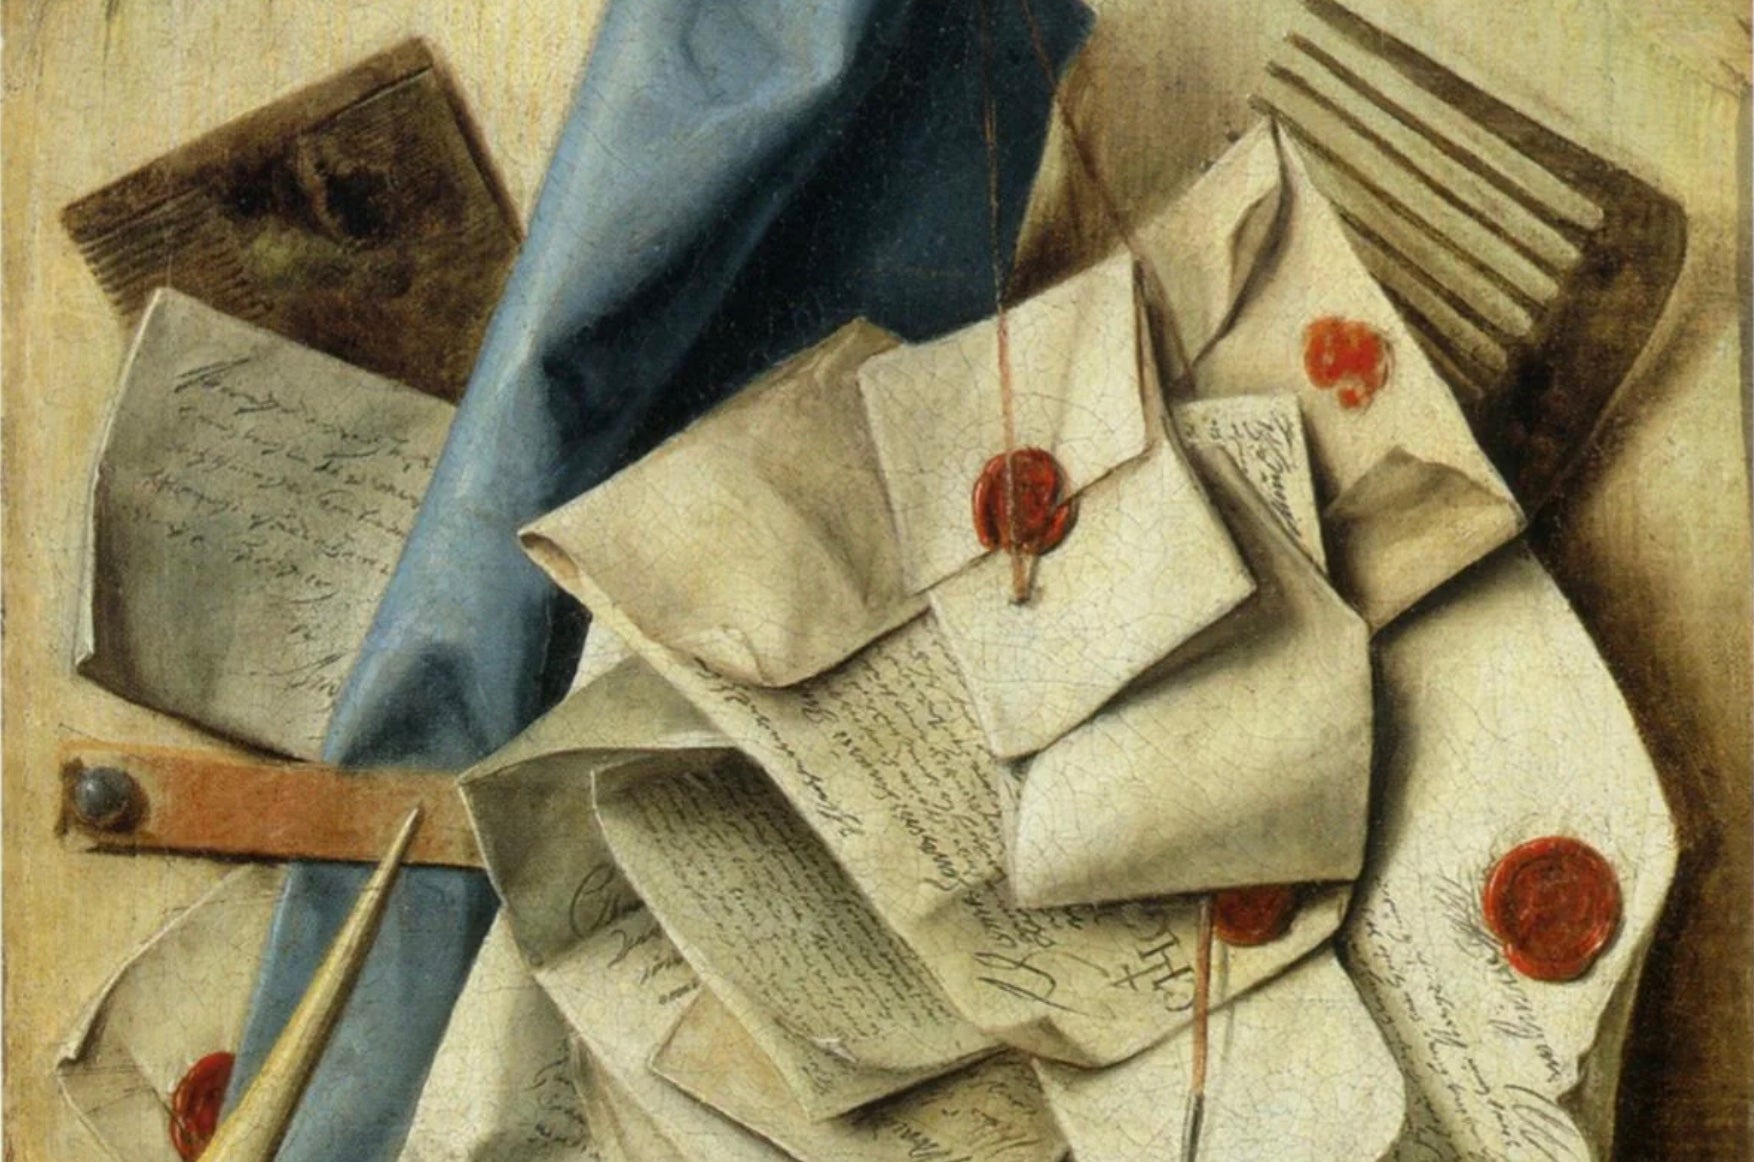 A Good and Faithful Service: A History of Mail in Early America